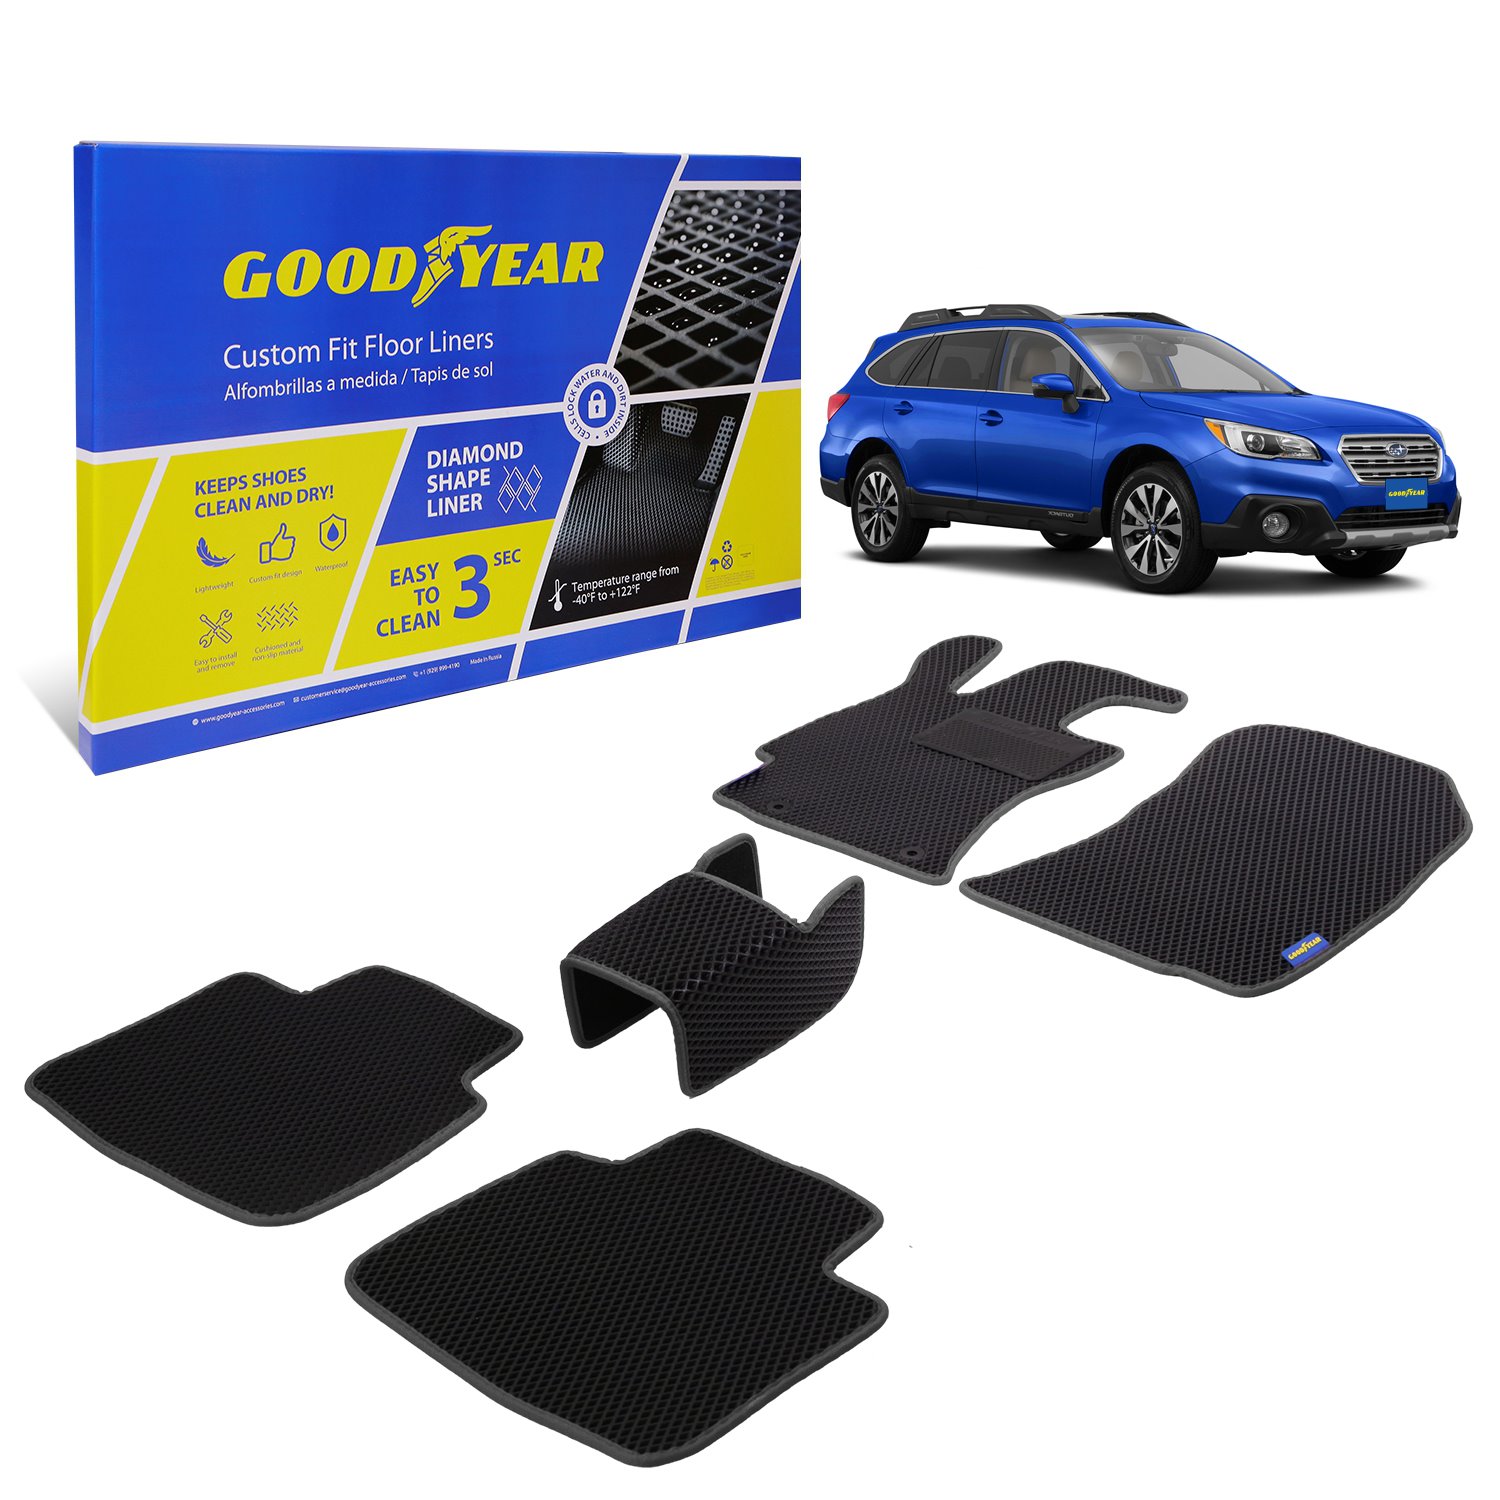 Goodyear Custom-Fit Floor Liners for 2015-2019 Subaru Outback